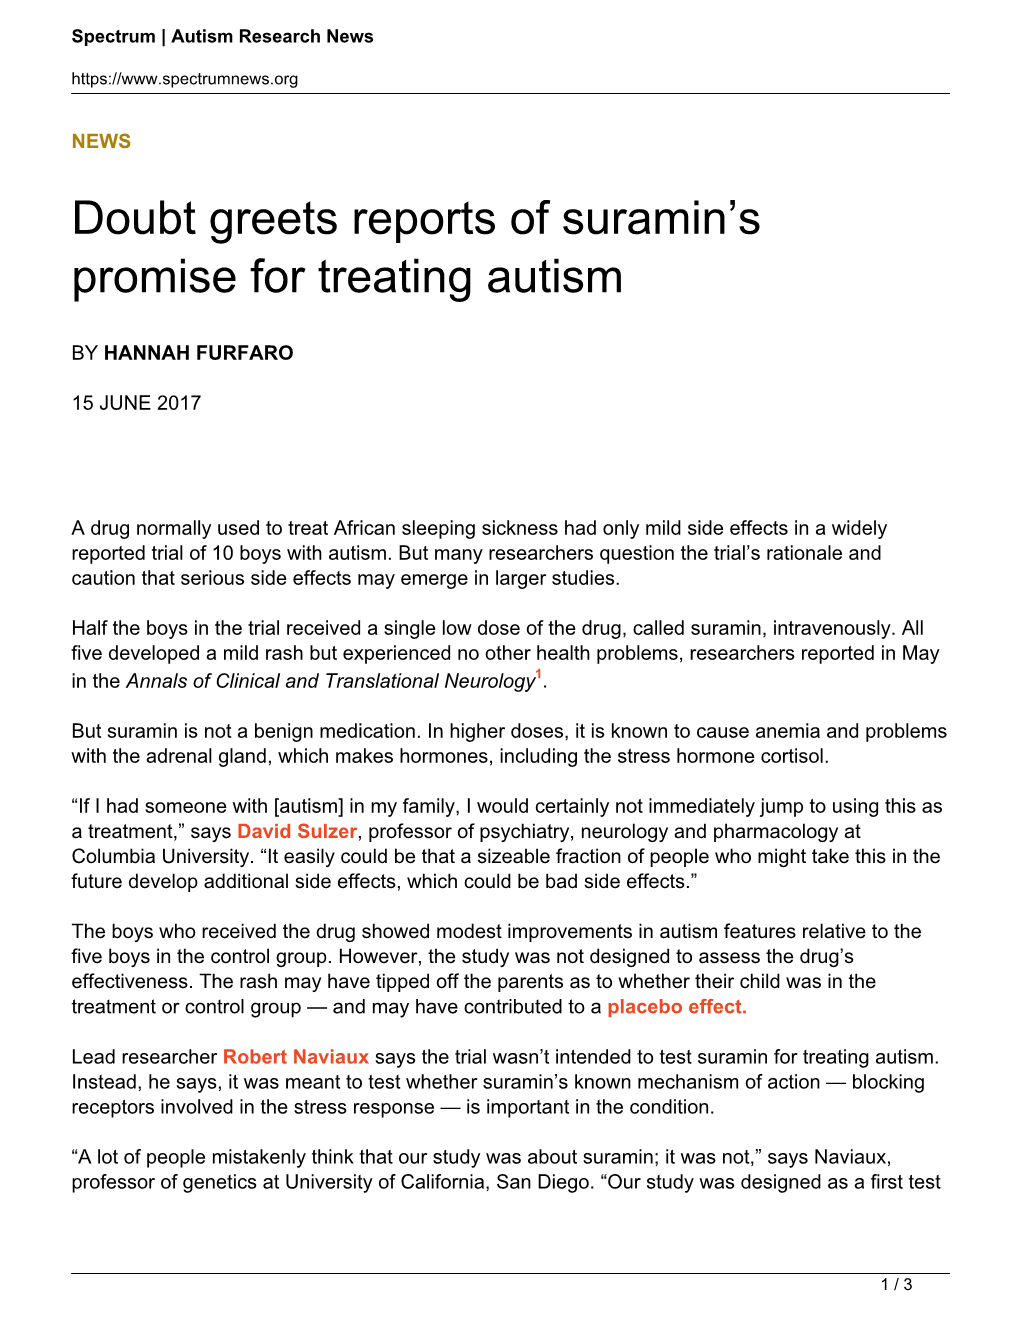 Doubt Greets Reports of Suramin's Promise for Treating Autism